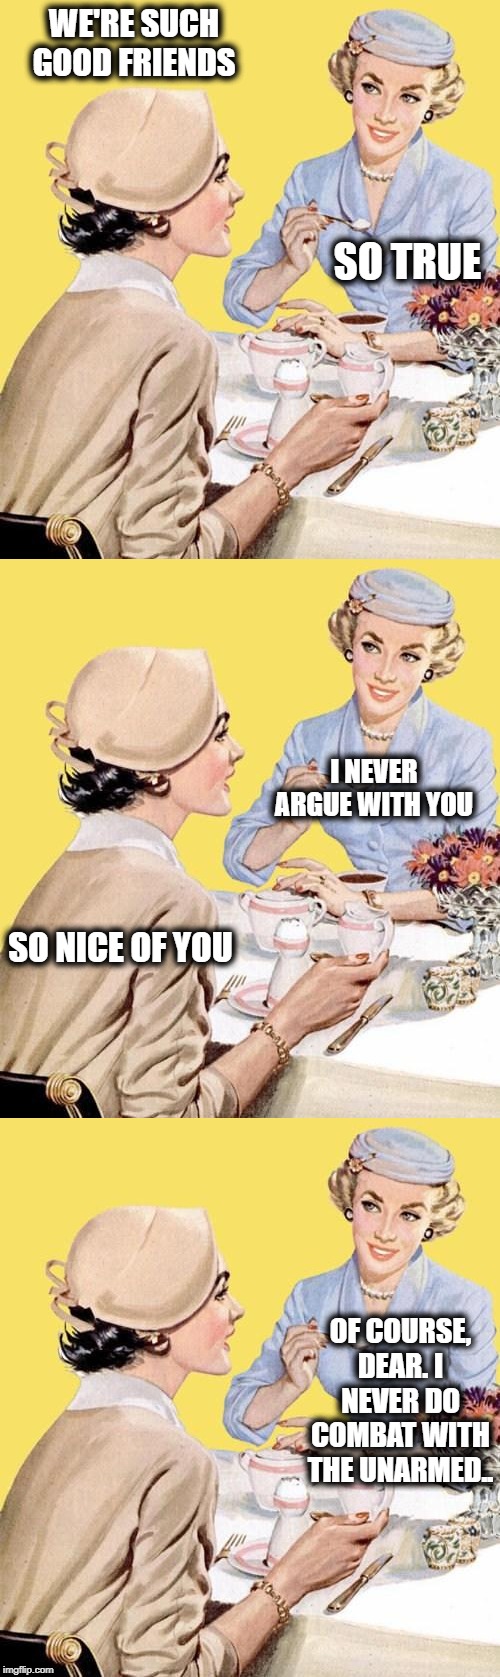 Such Good Friends | WE'RE SUCH GOOD FRIENDS; SO TRUE; I NEVER ARGUE WITH YOU; SO NICE OF YOU; OF COURSE, DEAR. I NEVER DO COMBAT WITH THE UNARMED.. | image tagged in humour | made w/ Imgflip meme maker